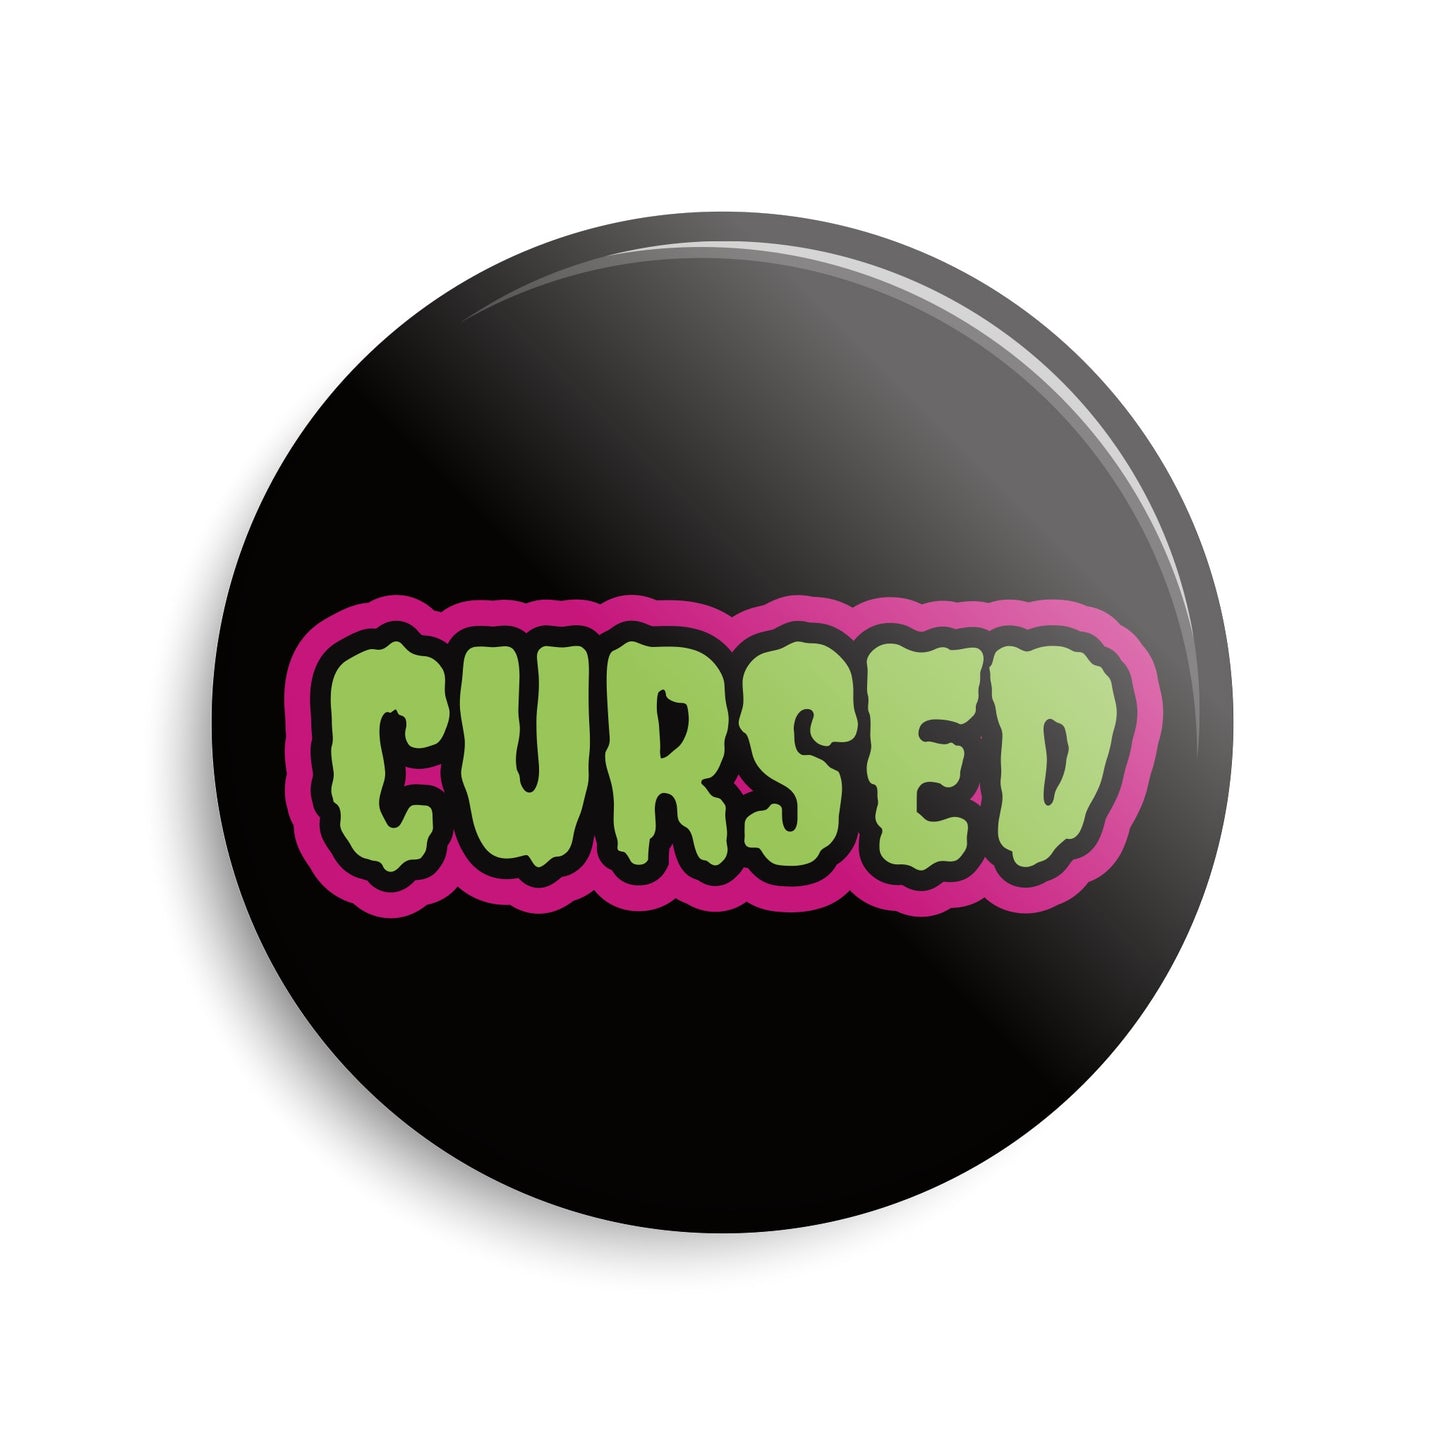 Cursed Pin-Back Button